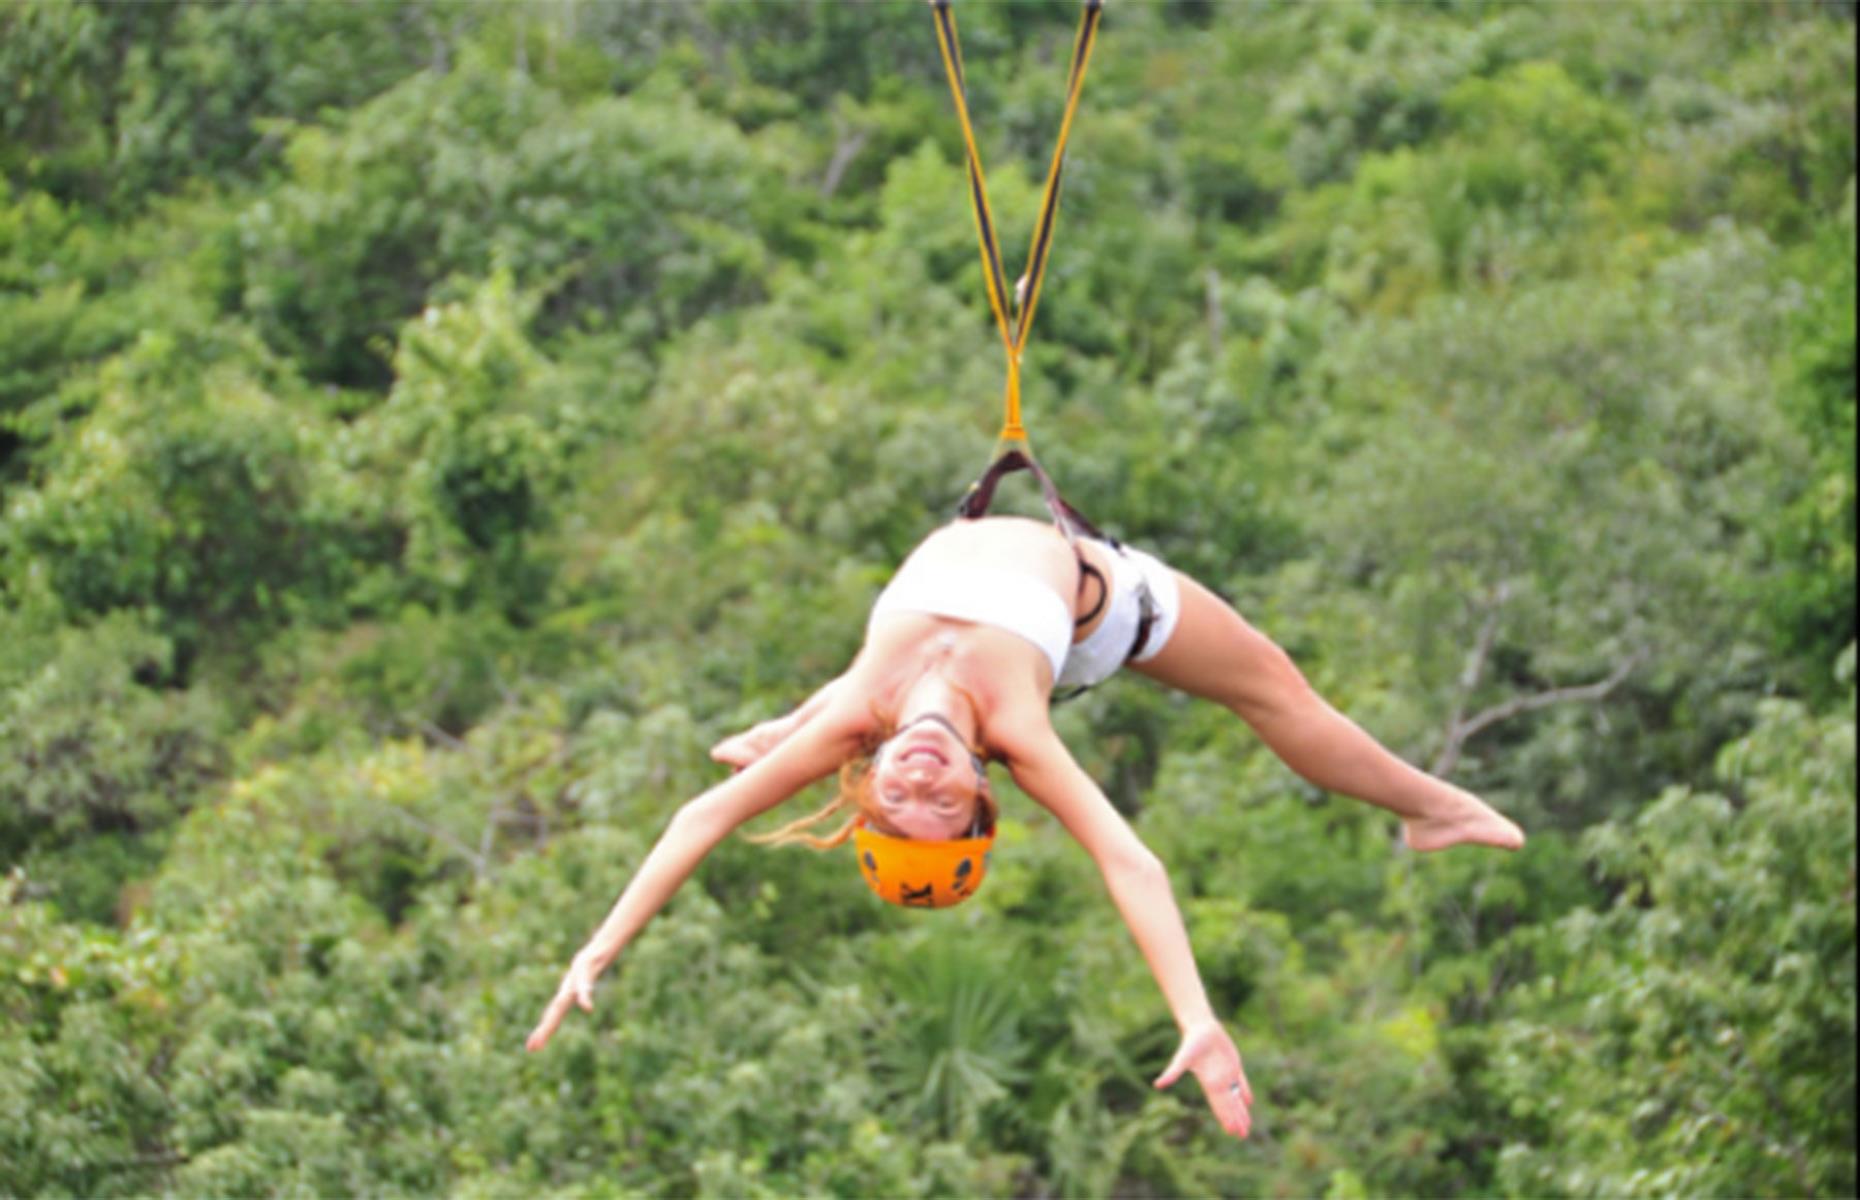 <p>An adventure park may not seem particularly unique, but there aren’t many places you can explore caves, swim through underground rivers covered in stalactites and stalagmites <em>and</em> glide across the jungle on a zip line. <a href="http://www.xplor.travel/">Xplor Park</a> is one of Cancun's most popular and highly-rated attractions, open Monday to Saturday only.</p>